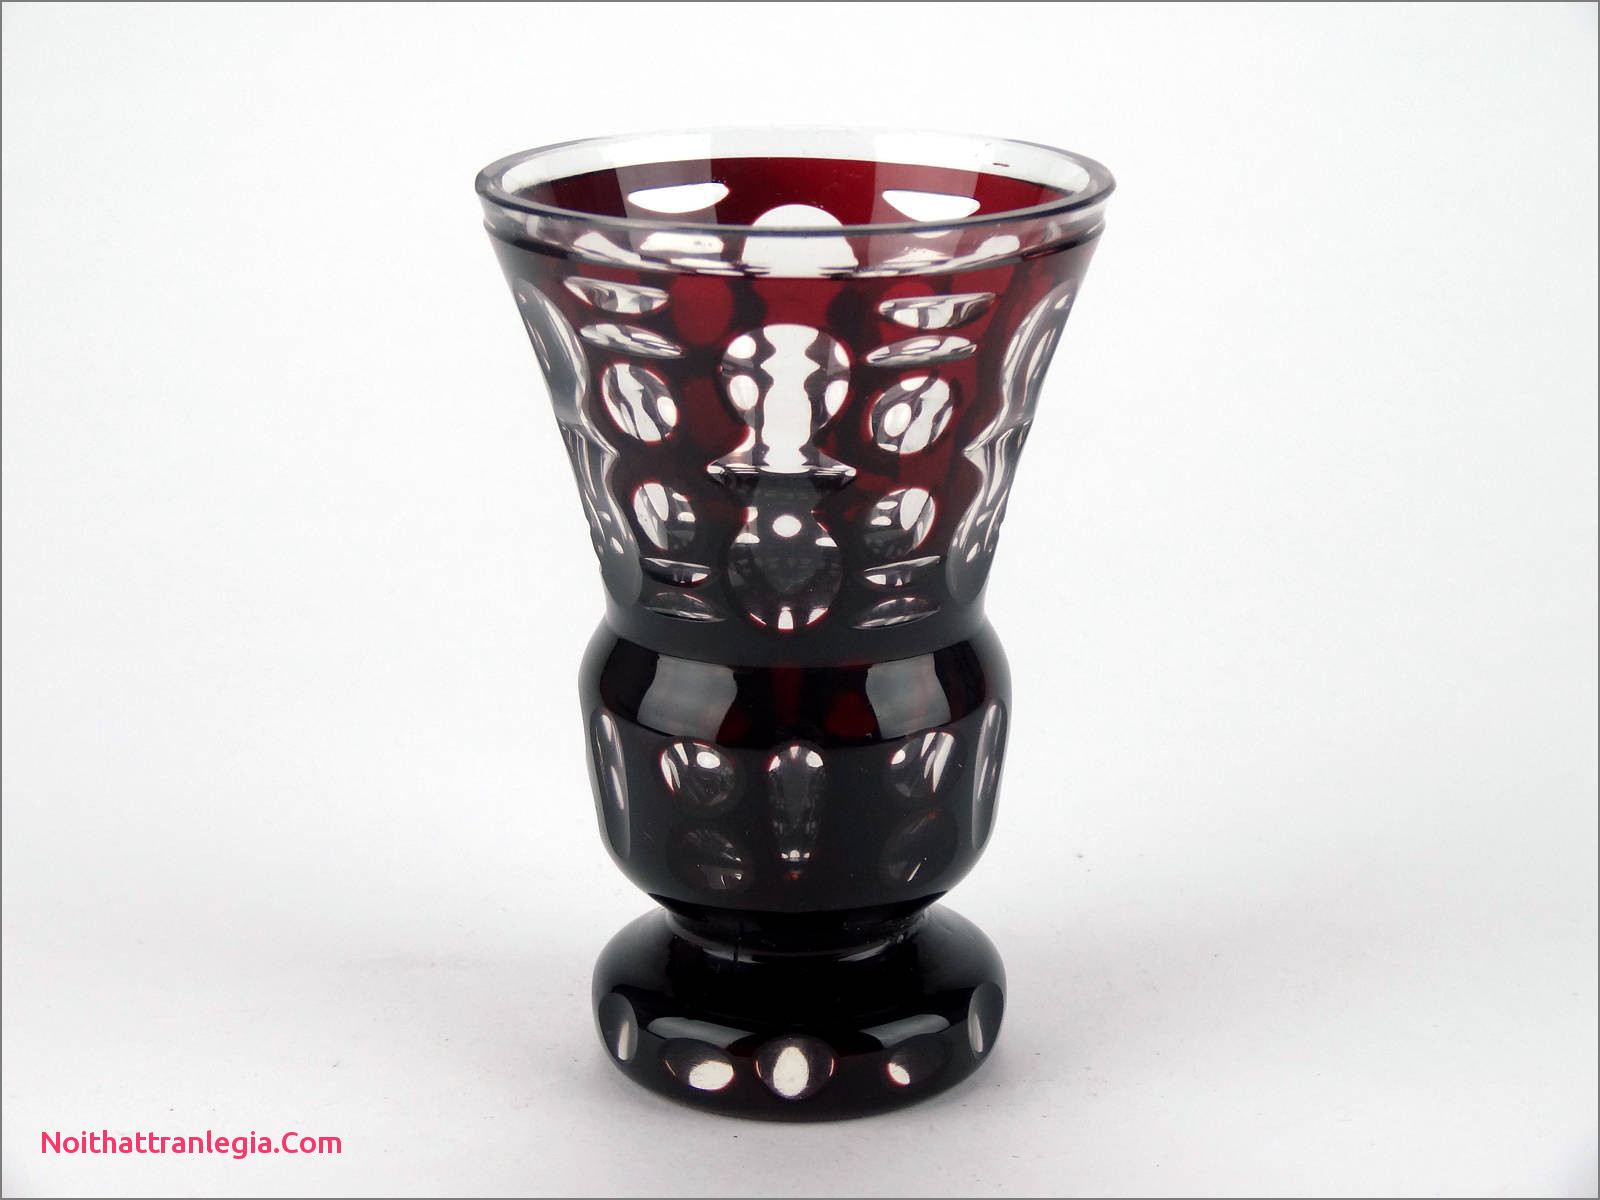 13 Lovable Vintage Czech Glass Vase 2024 free download vintage czech glass vase of 20 cut glass antique vase noithattranlegia vases design pertaining to antique c1910 bohemian cut to clear red glass vase czech ruby red cut glass goblet